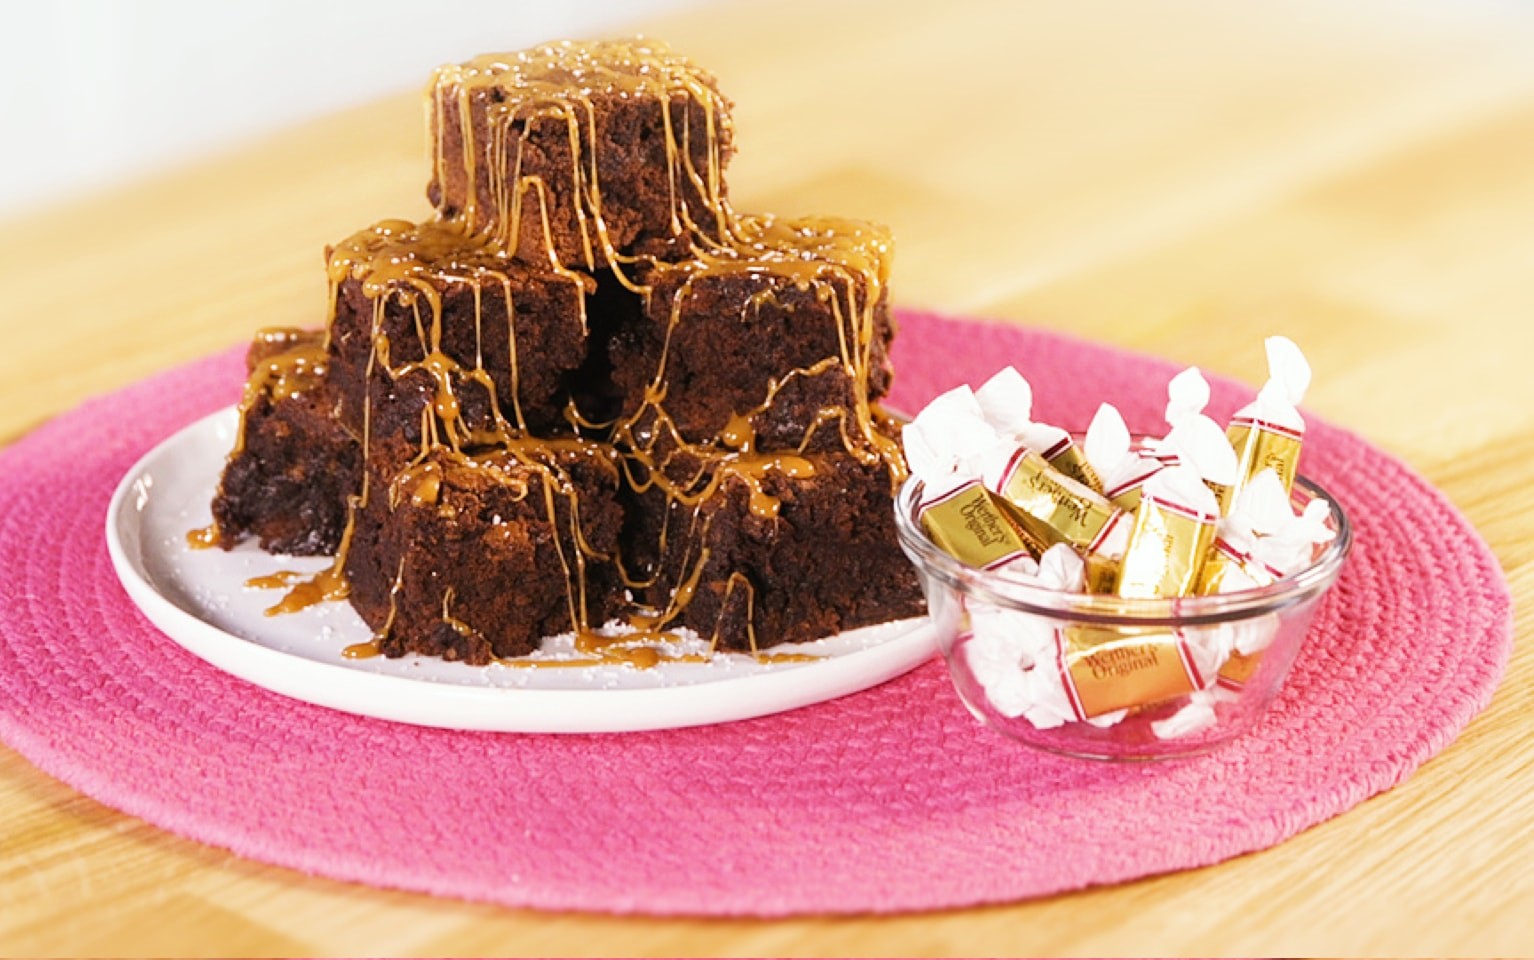 Werther's Salted Caramel Brownies